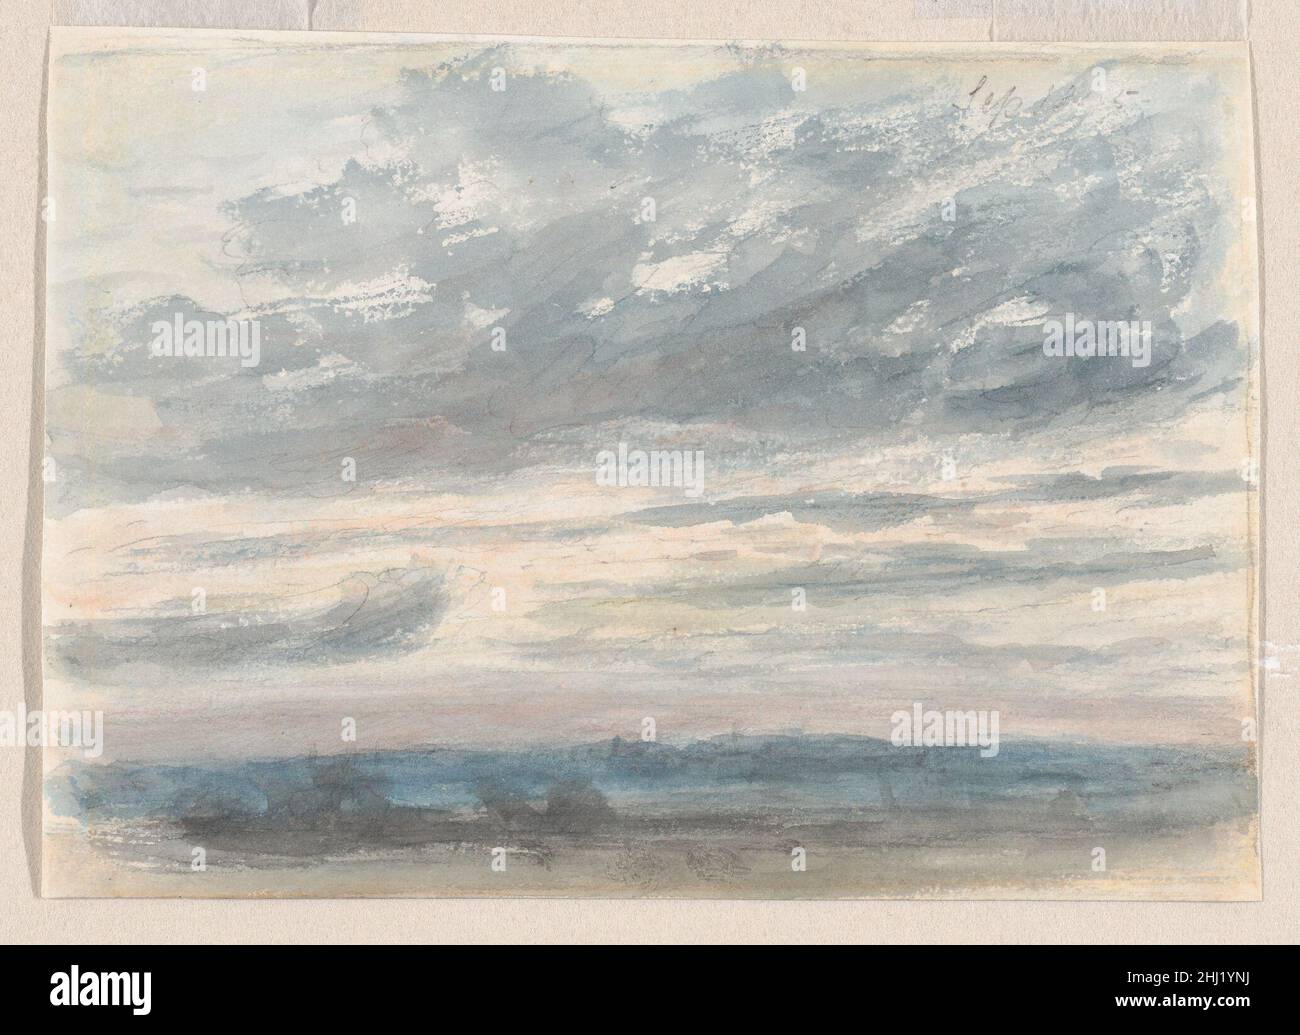 Cloud Study 1830–35 John Constable On a sketchbook page worked outdoors, Constable captures a September sun sinking through clouds. The artist’s studies of England’s changeable skies are considered among his most characteristic works, part of a systematic and pioneering effort across decades to record varying weather conditions at different times of day. The present Met collection work is an exciting rediscovery because most surviving cloud studies, whether in oil or watercolor, were bequeathed to the Victoria and Albert Museum by the artist’s daughter. The exact subject and date remain to be Stock Photo